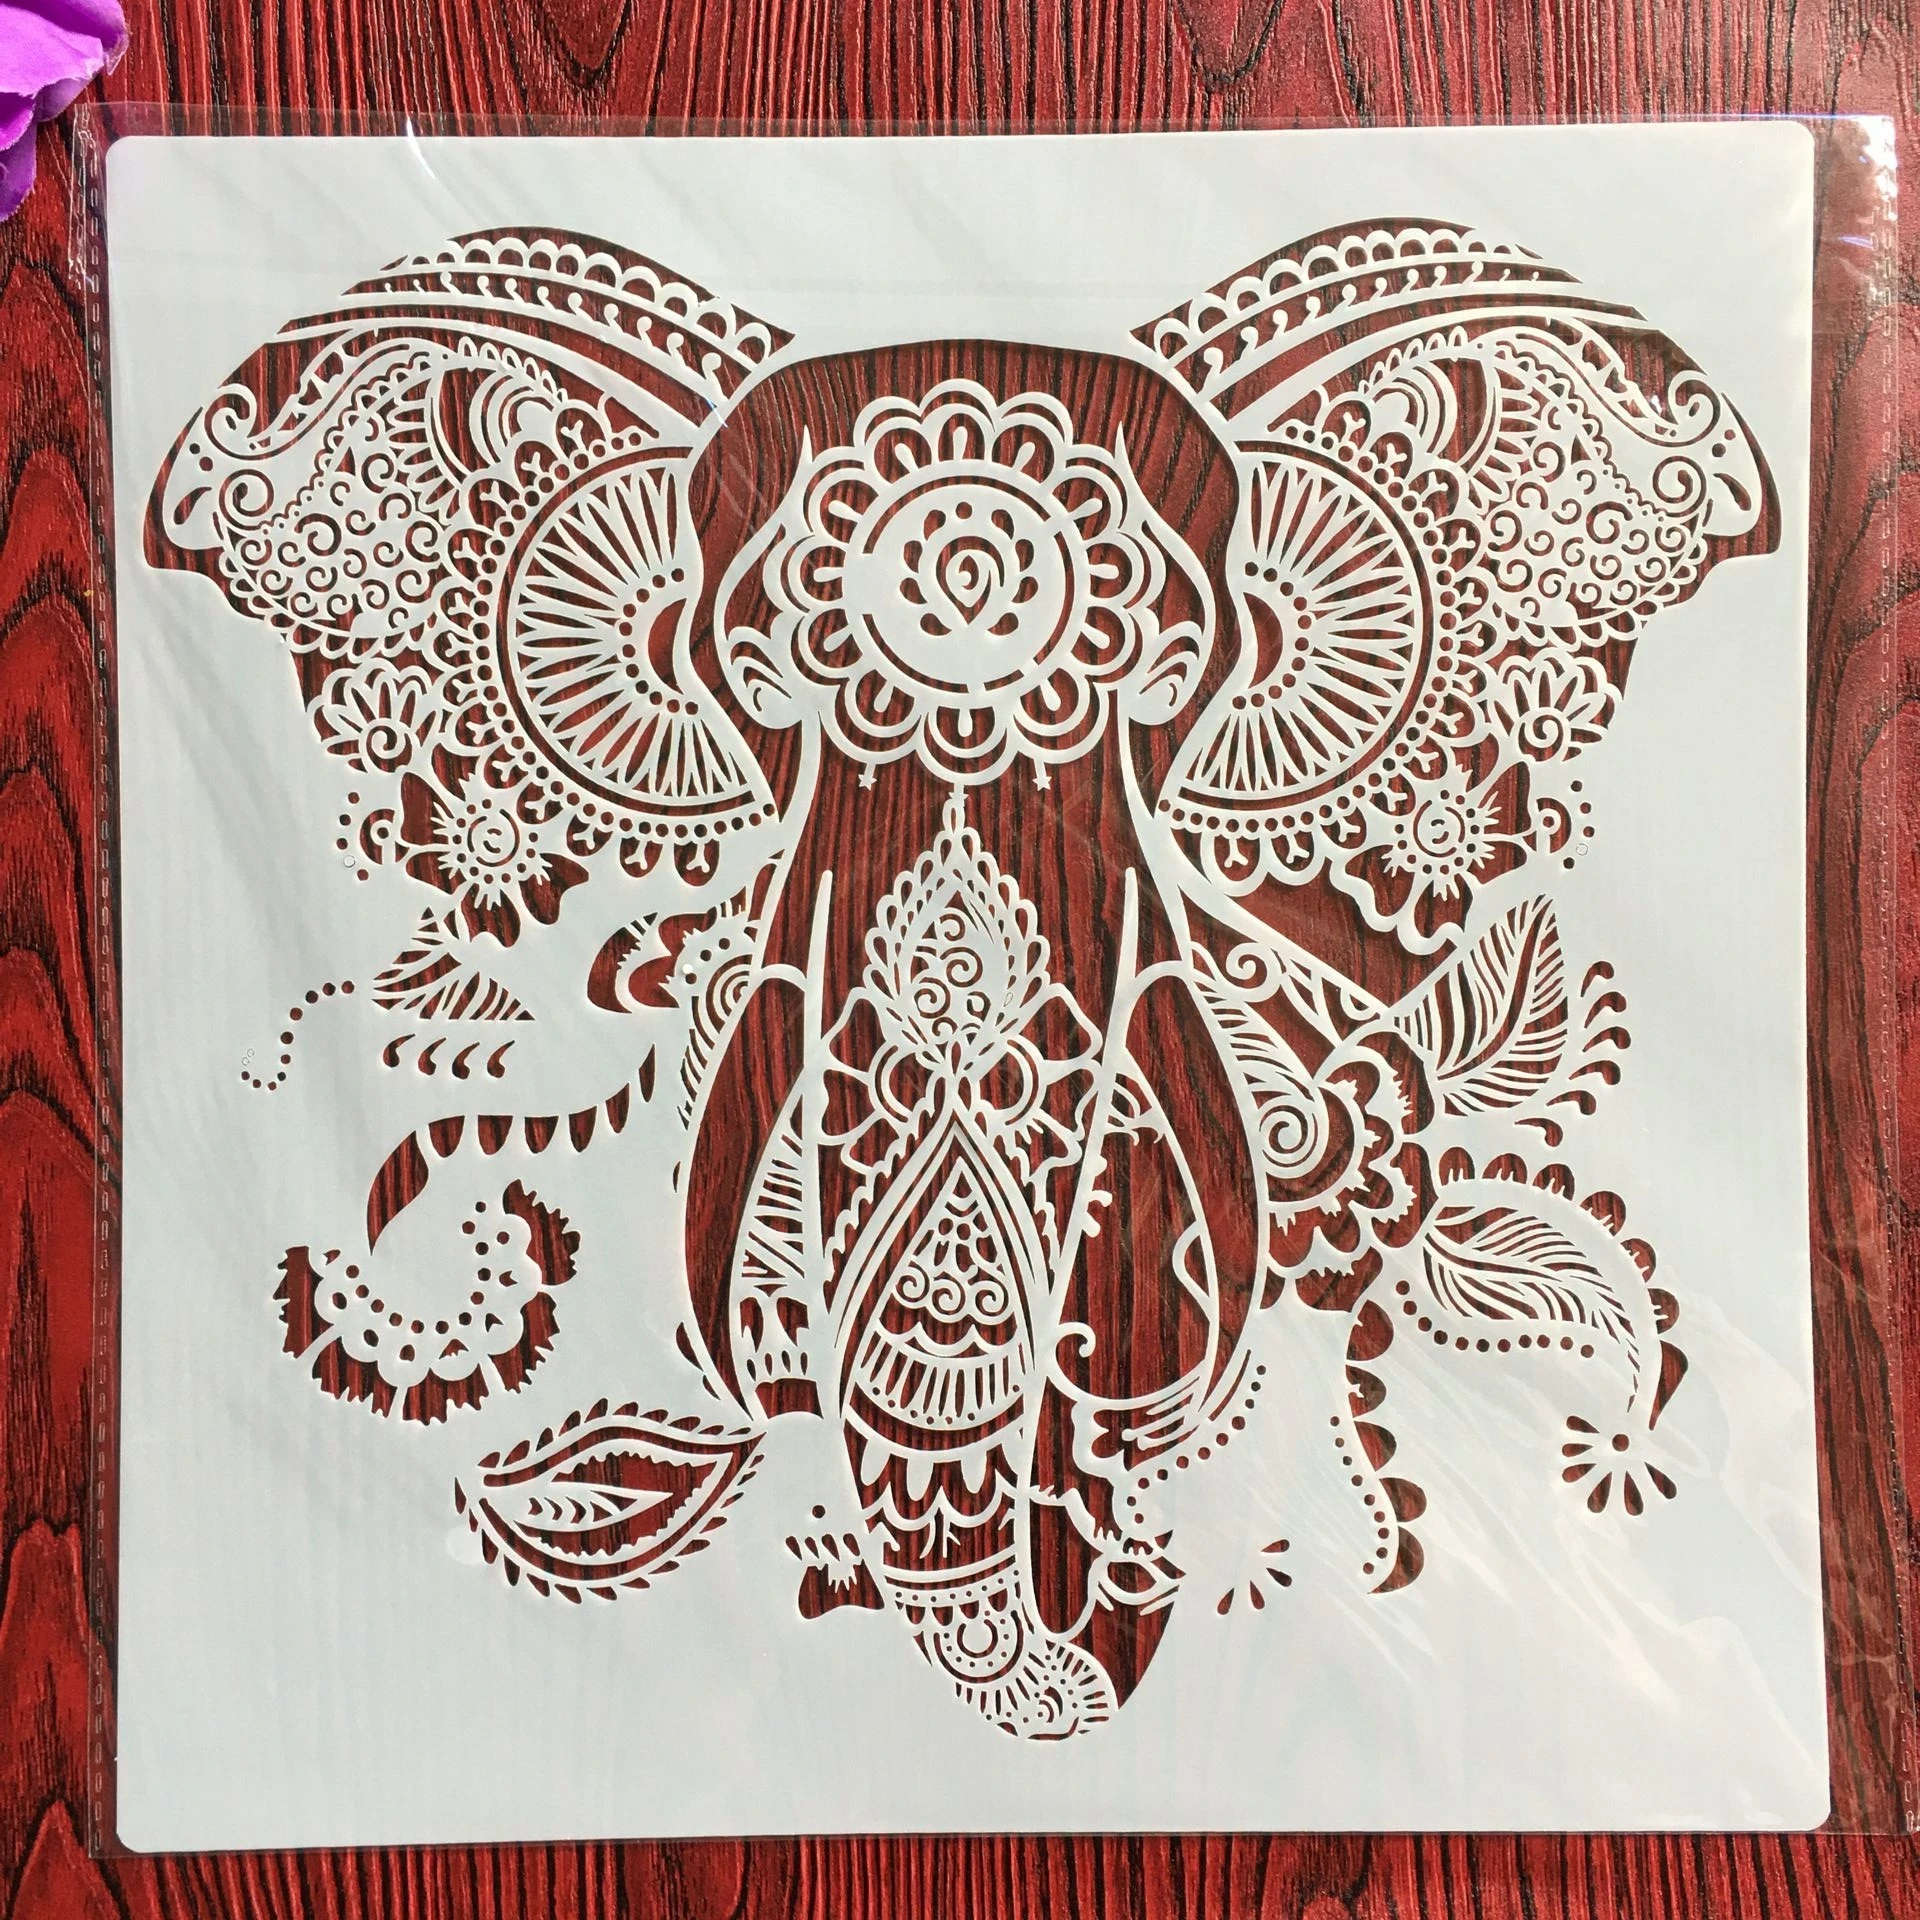 30 * 30cm size diy craft Animal elephant mold for painting stencils stamped photo album embossed paper card on wood, fabric,wall